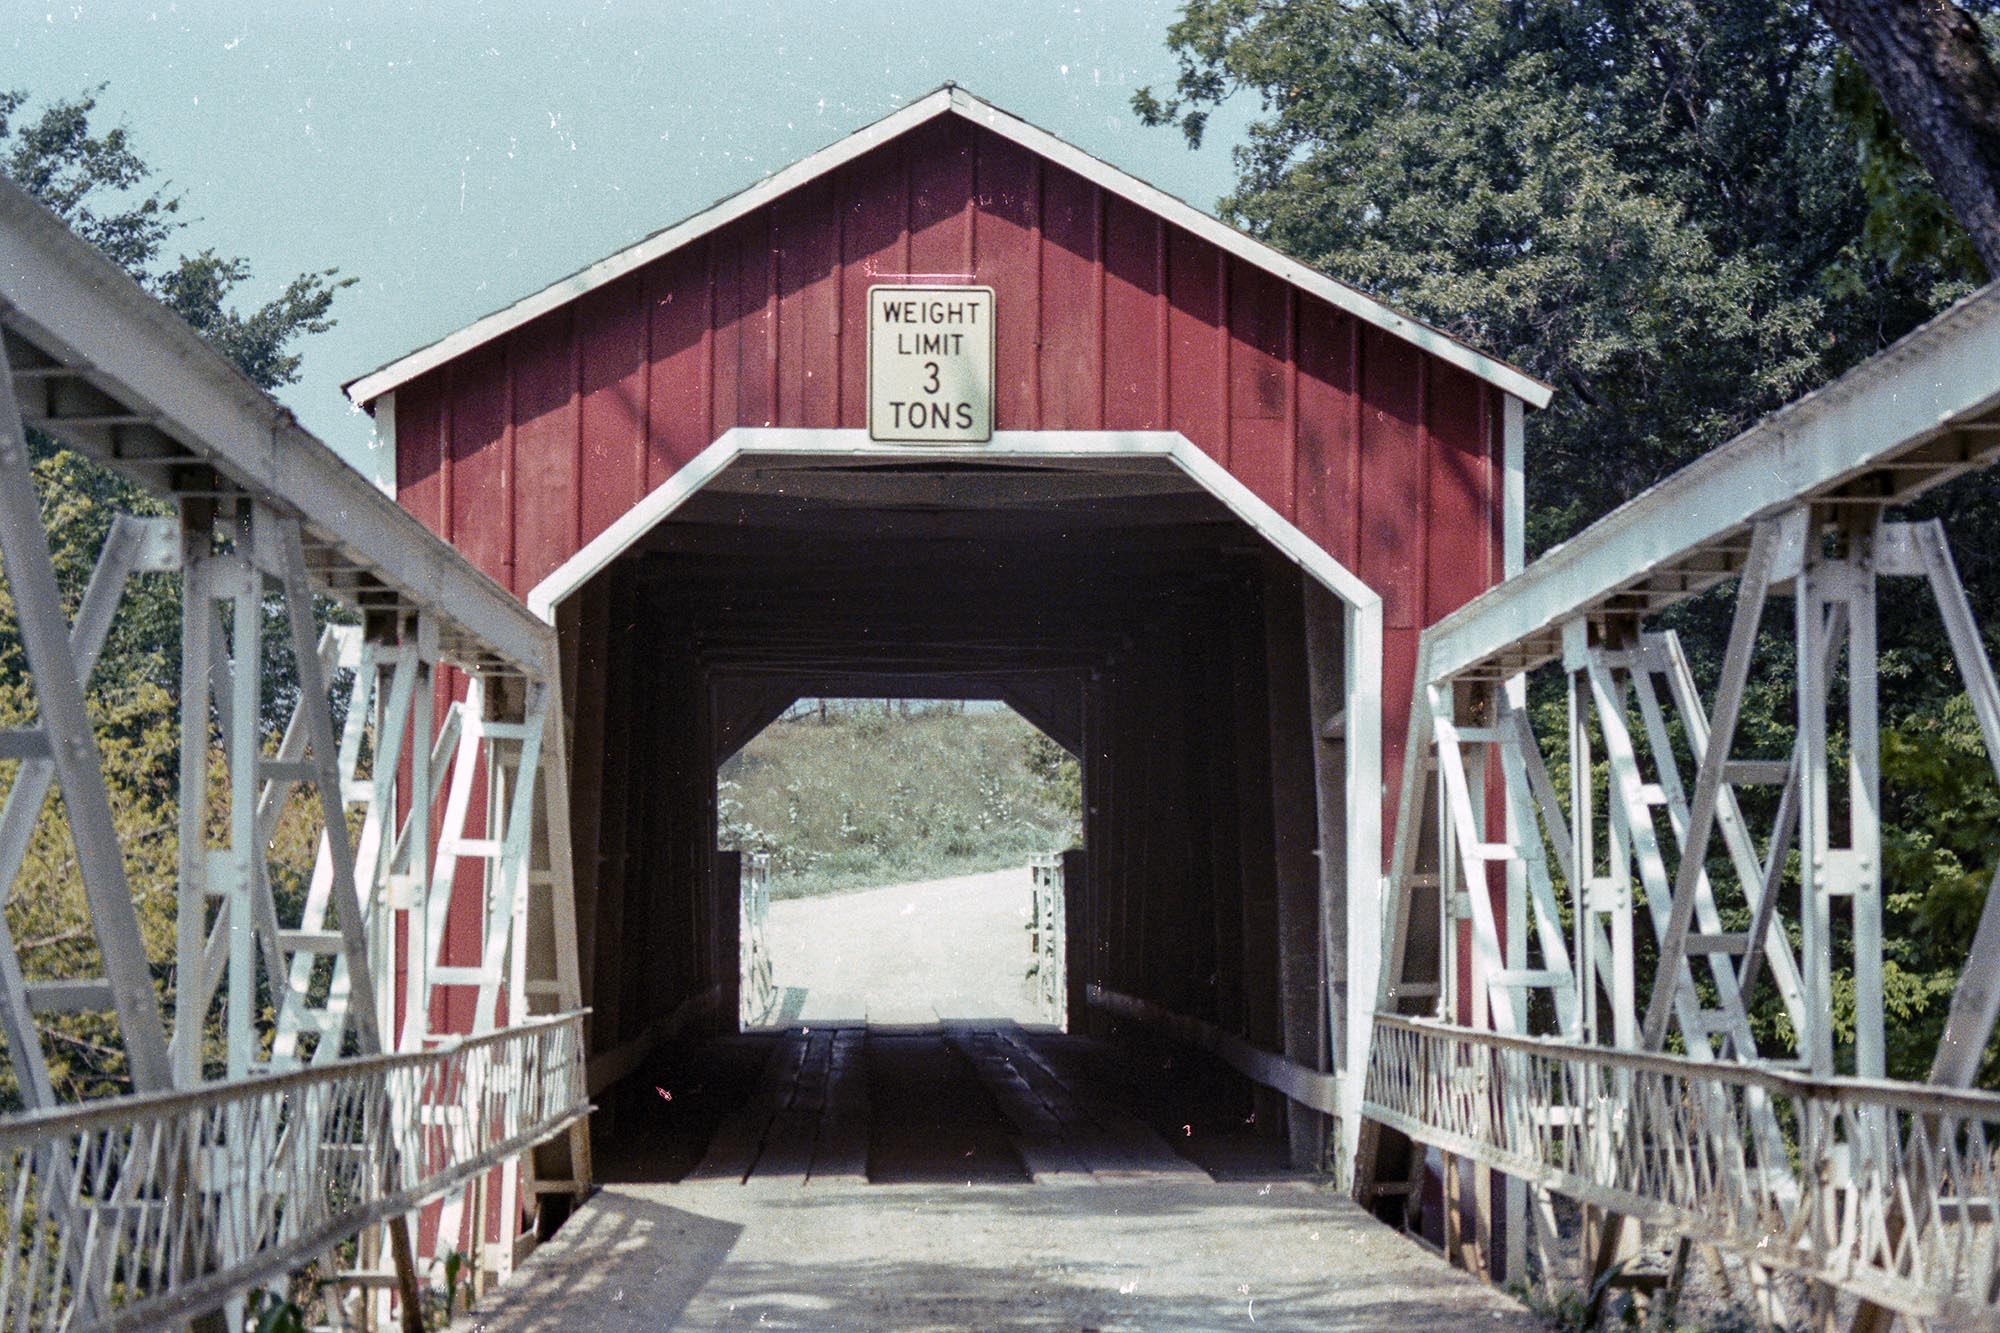 The Wolf Covered Bridge over the Spoon River in Knox County, Illinois, 1979. The bridge was built by cattle rancher Jacob Wolf in 1848. Wolf designed it to resemble an open barn door so that cattle would cross it more willingly and without incident.

James Burkhalter, a former Civil War Captain, built a swinging end-door enclosure a year after a flood in 1873. The enclosure helped to preserve the wood from rot and reinforced the bridge.

The bridge burned on August 1, 1994. Three boys were arrested for arson. After a lengthy trial, the juveniles were found guilty on lesser charges and placed on probation. All were under-age at the time of the fire. A replica was built in 1999 and made wider and taller for modern vehicles.